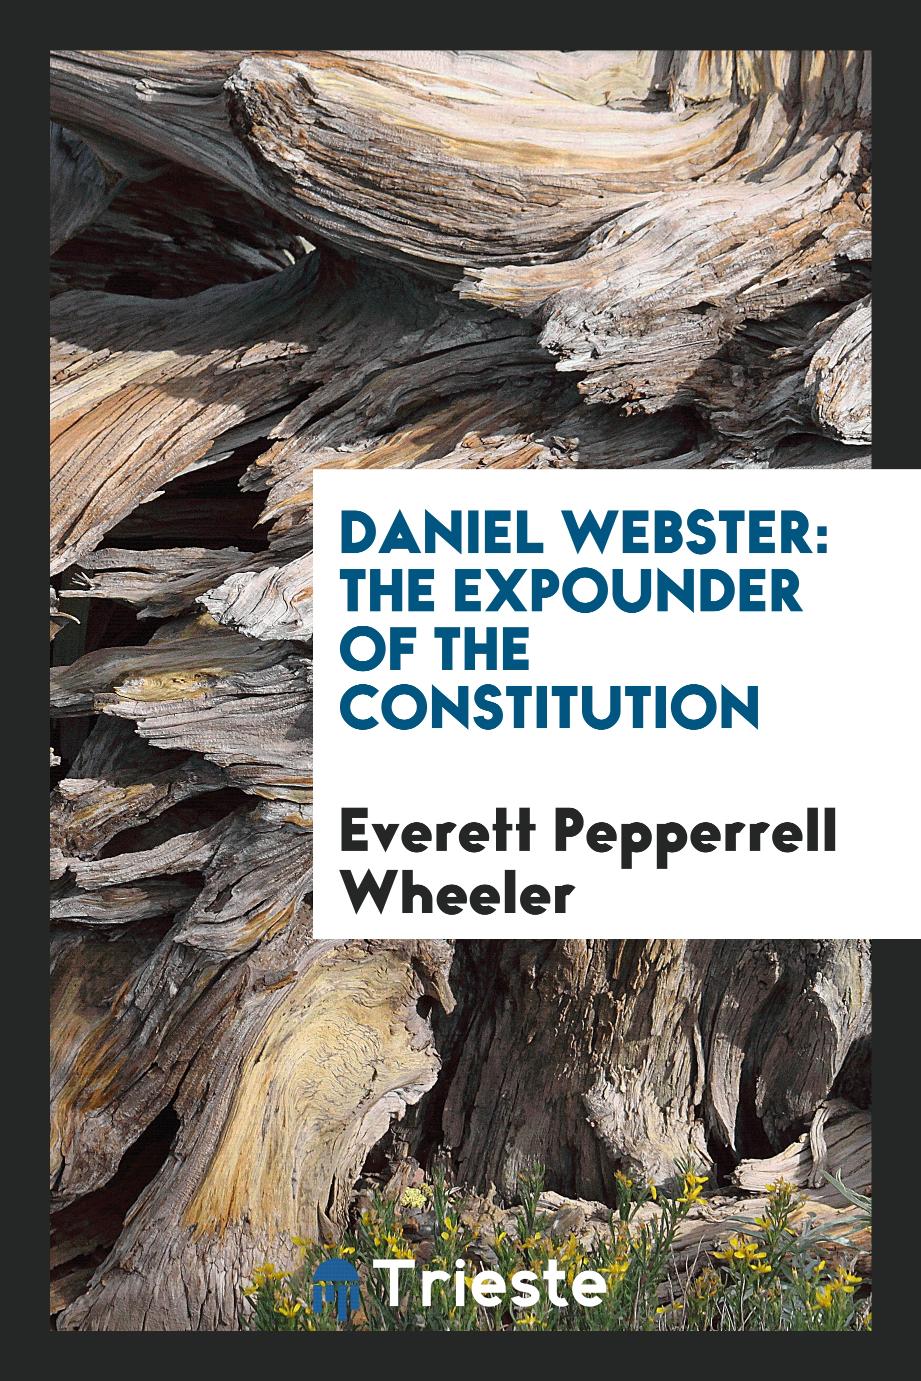 Daniel Webster: The Expounder of the Constitution